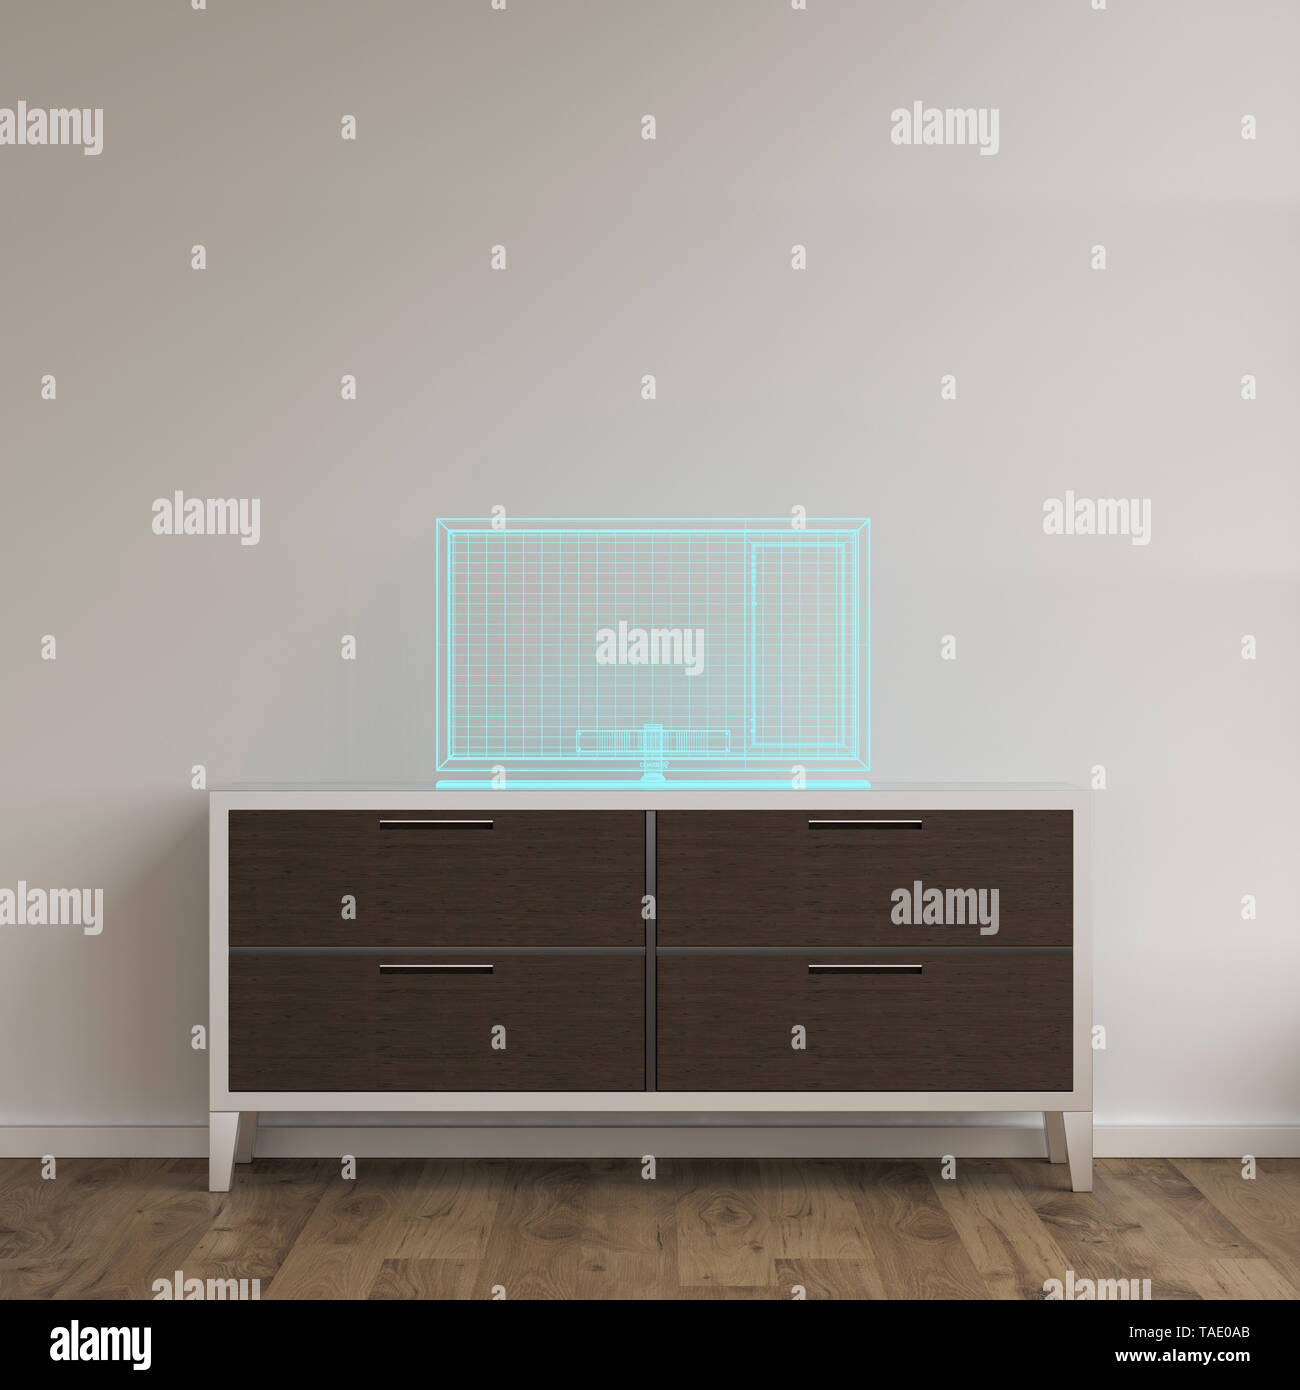 3D rendering, Holgram of a TV set on a sideboard Stock Photo